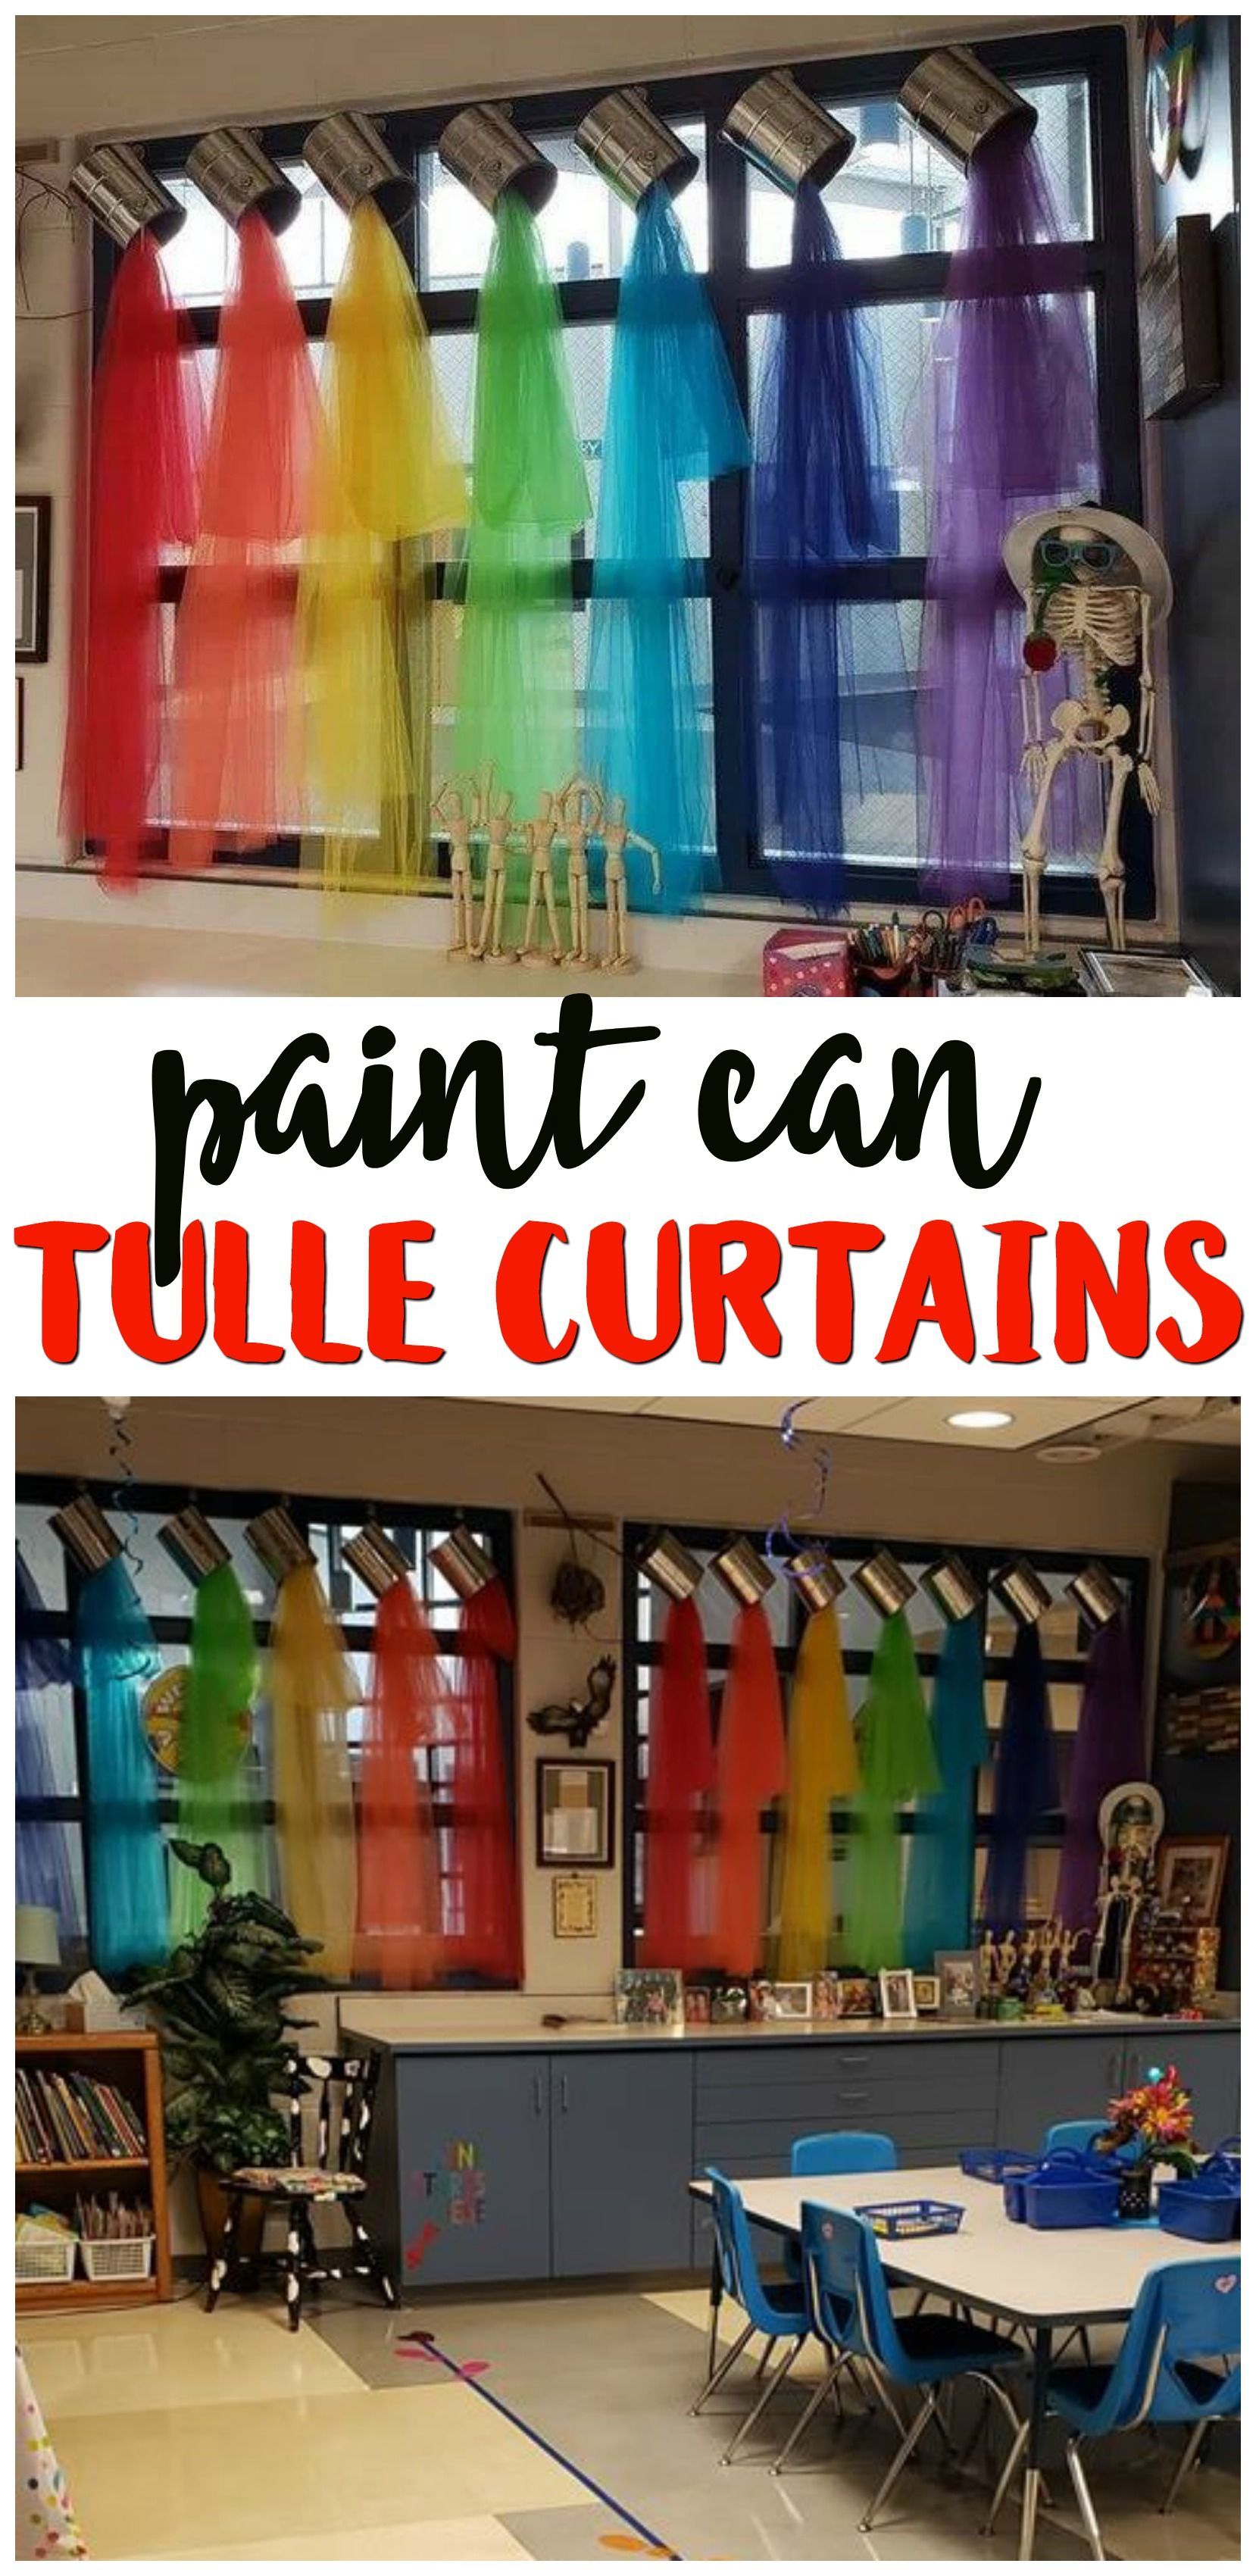 Pouring Paint Can Tulle Curtains -   16 room decor Art classroom ideas